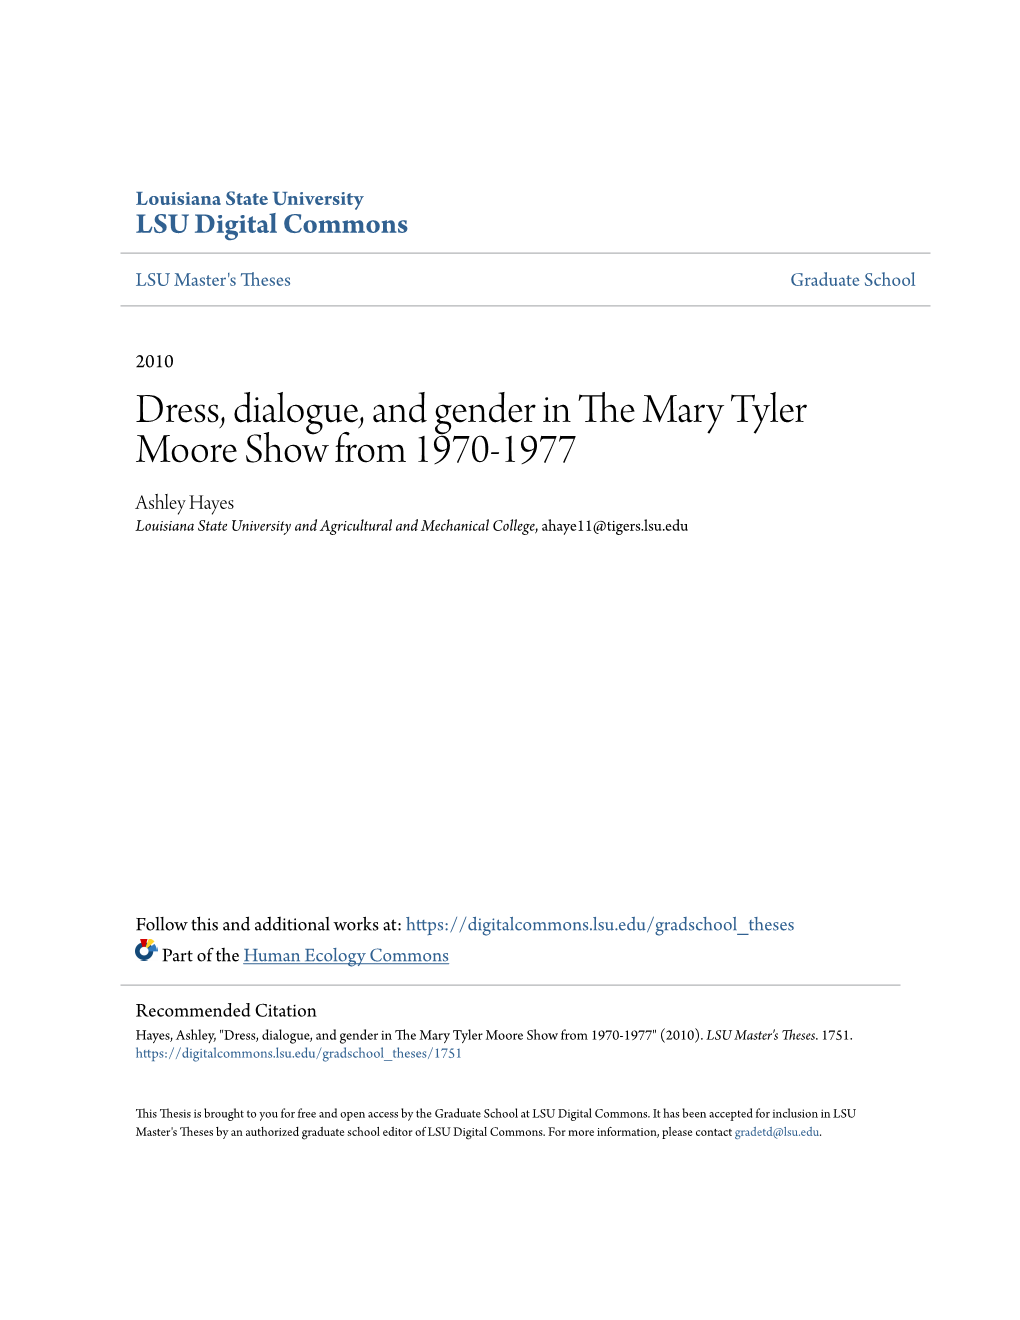 Dress, Dialogue, and Gender in the Mary Tyler Moore Show from 1970-1977